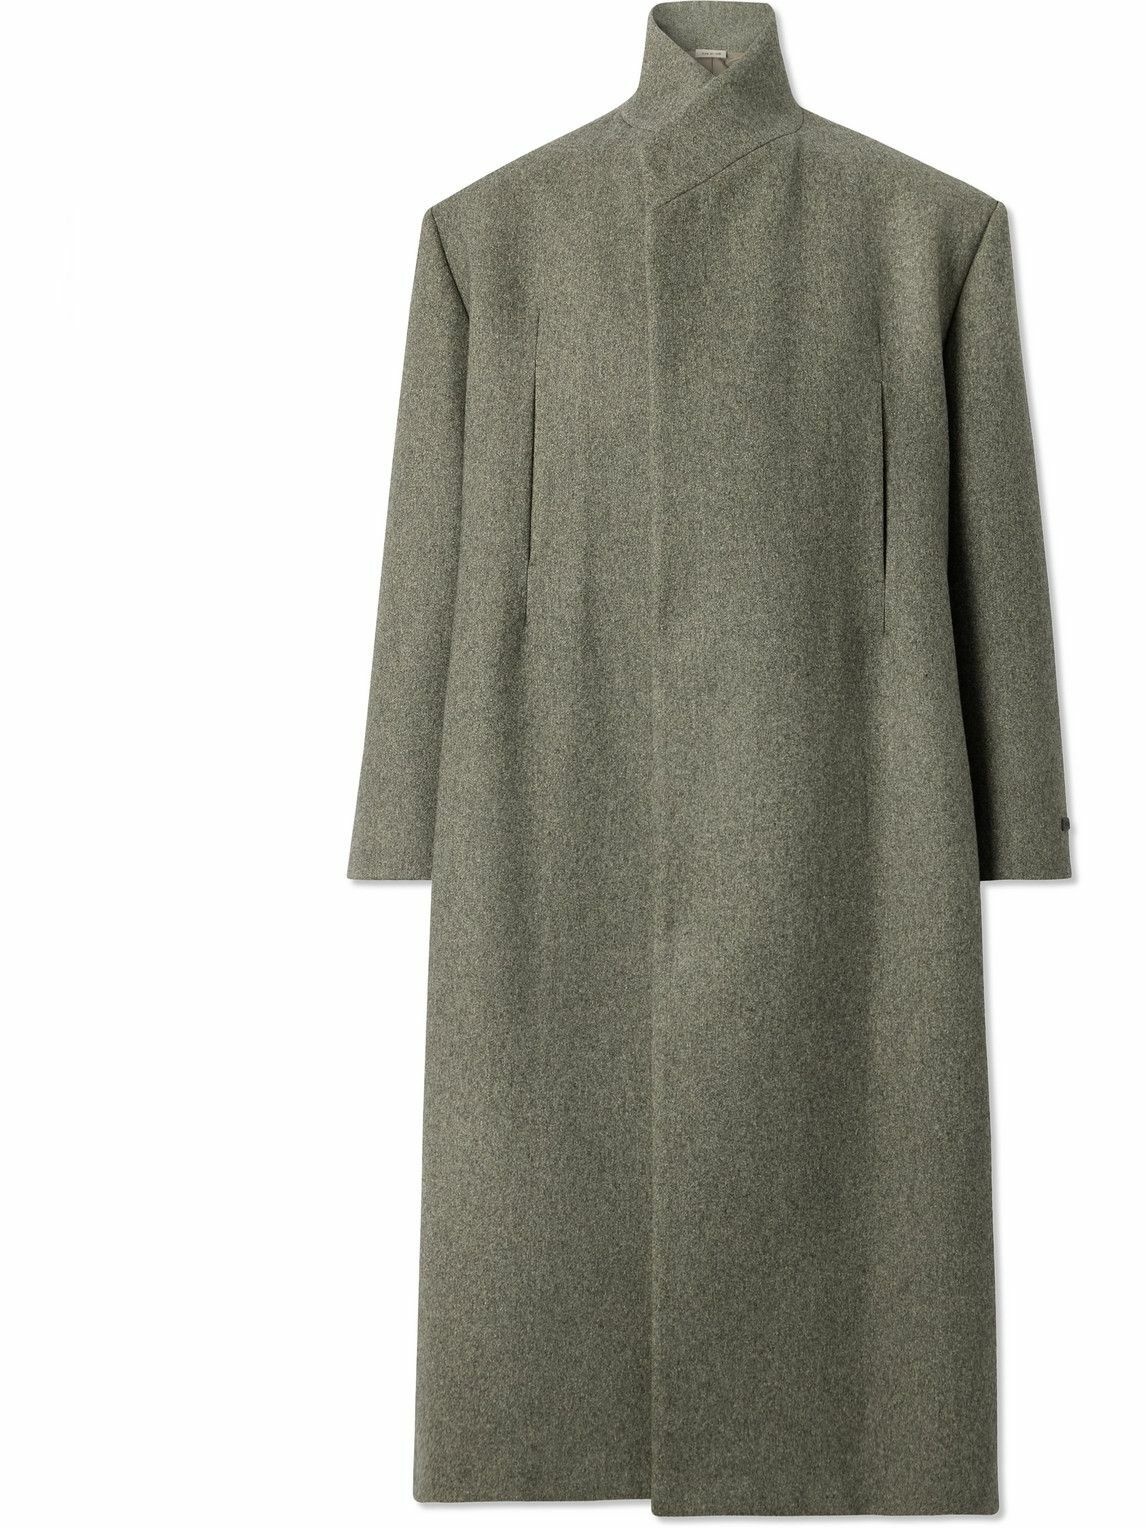 Photo: Fear of God - Virgin Wool and Cotton-Blend Overcoat - Green